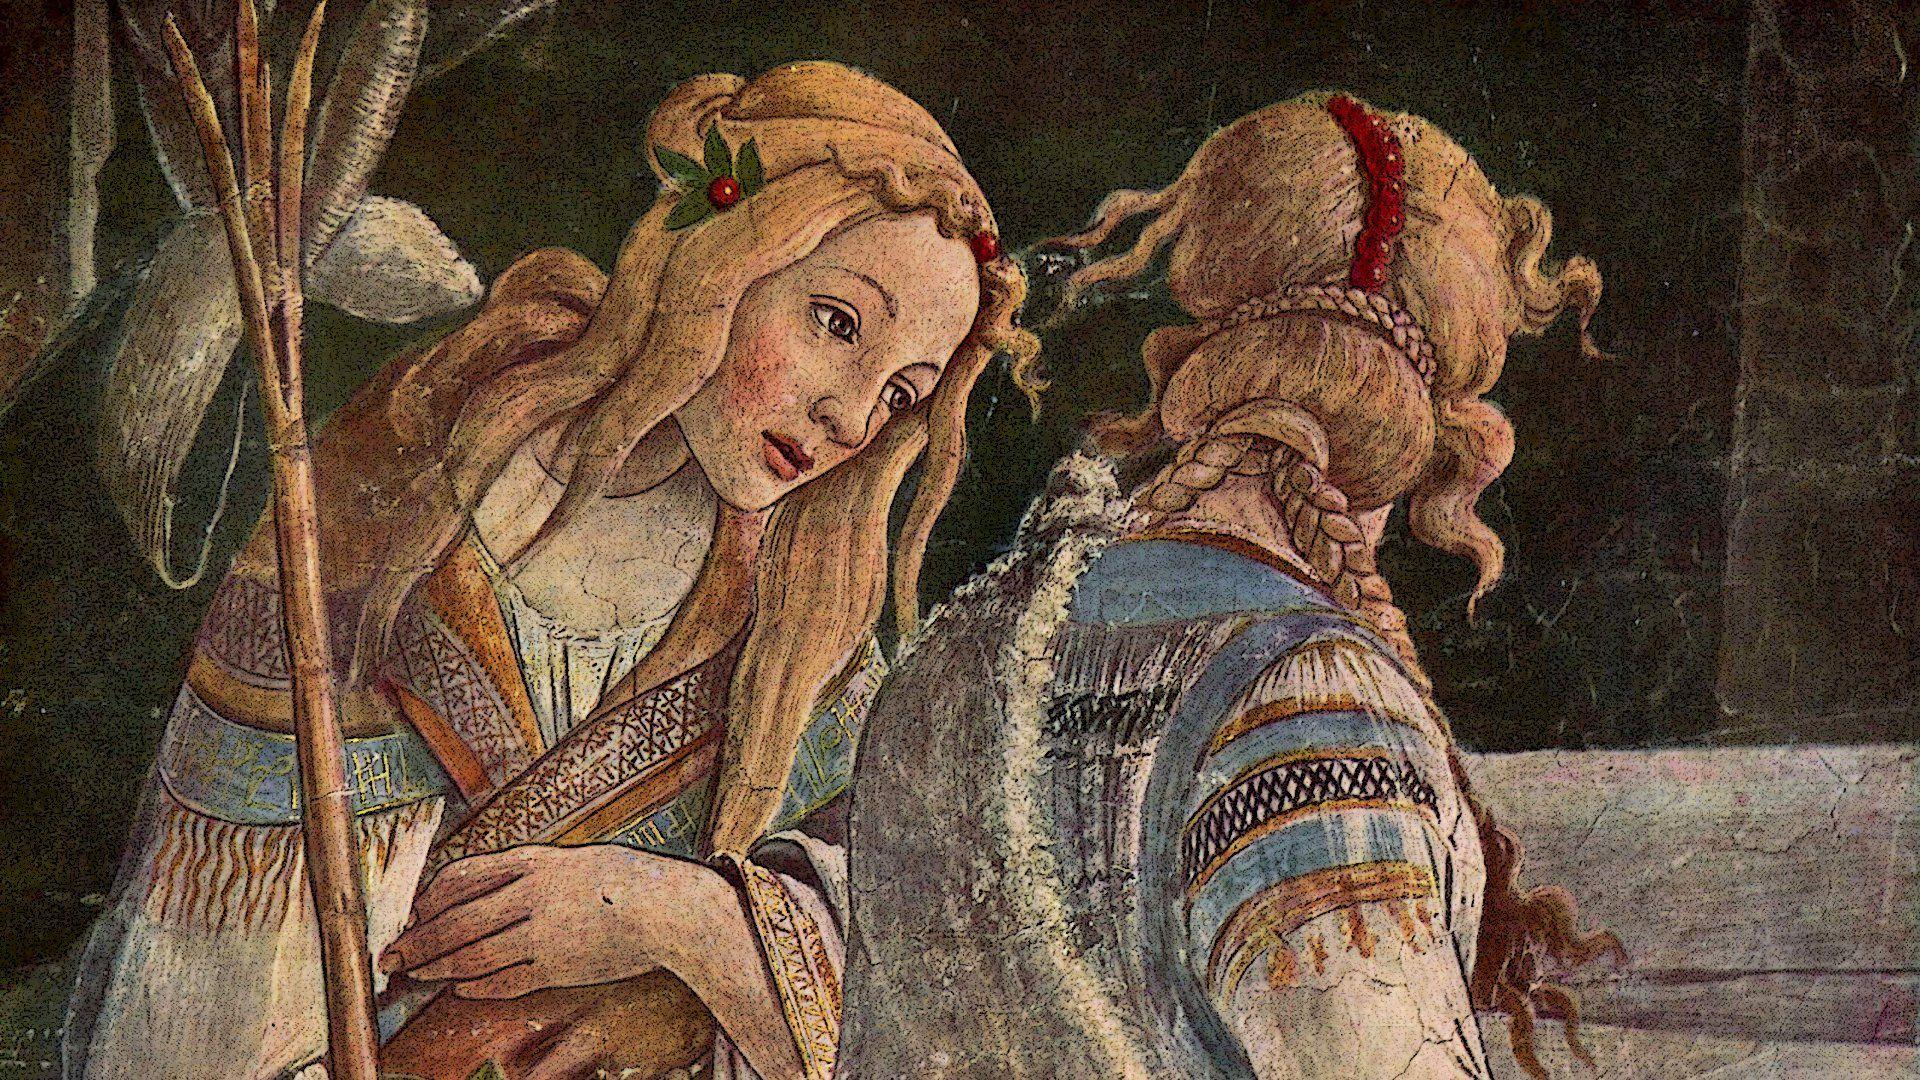 Botticelli Art Wallpapers  HD Apk Download for Android Latest version  10 nofeewallpapermeganBotticelliArt